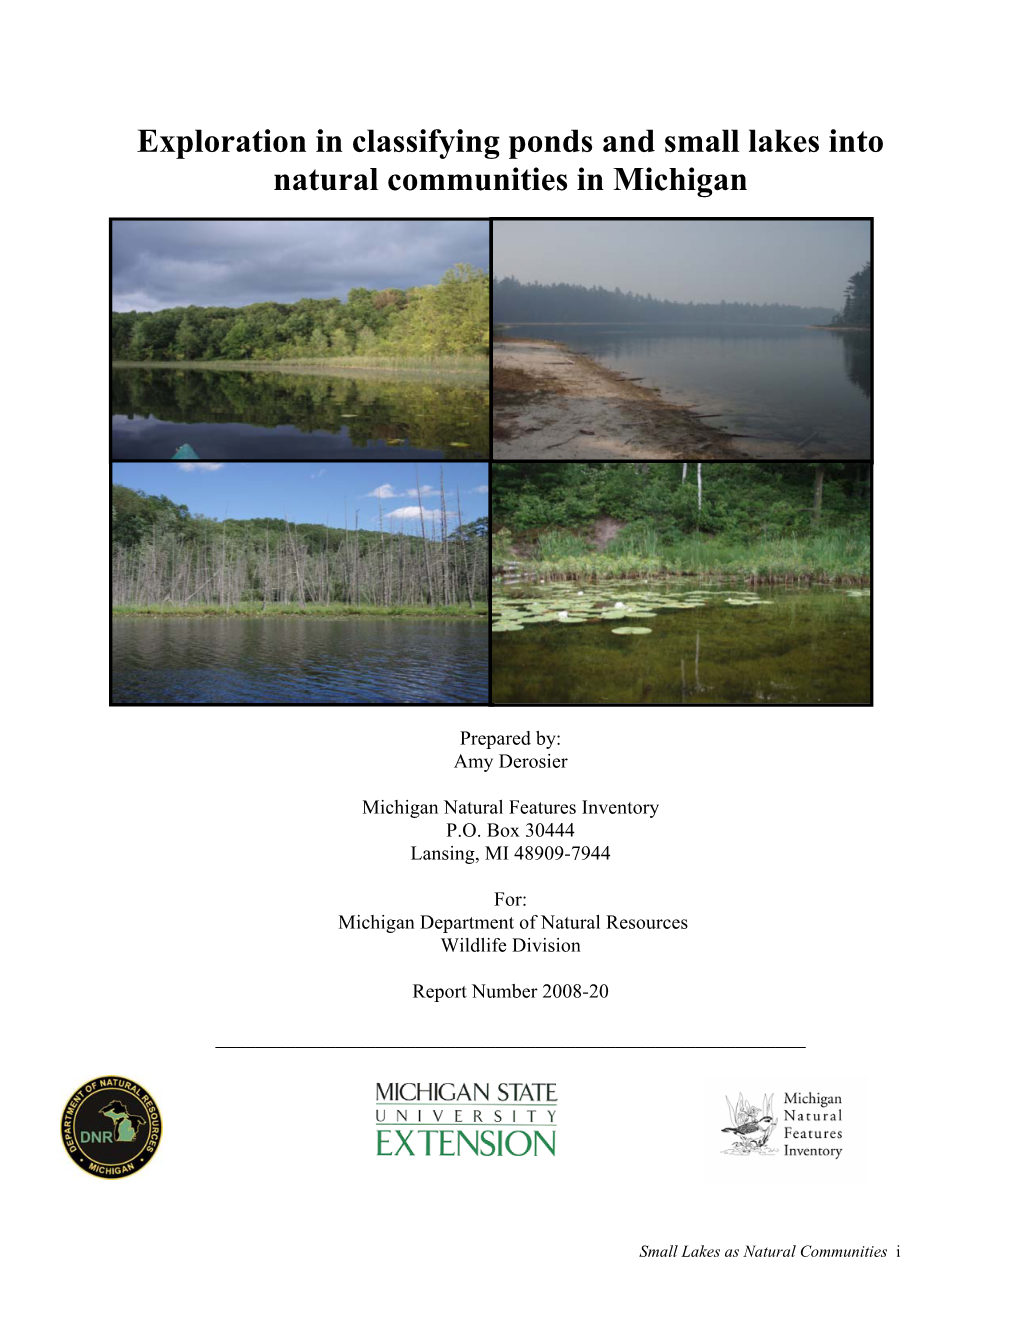 Exploration in Classifying Ponds and Small Lakes Into Natural Communities in Michigan